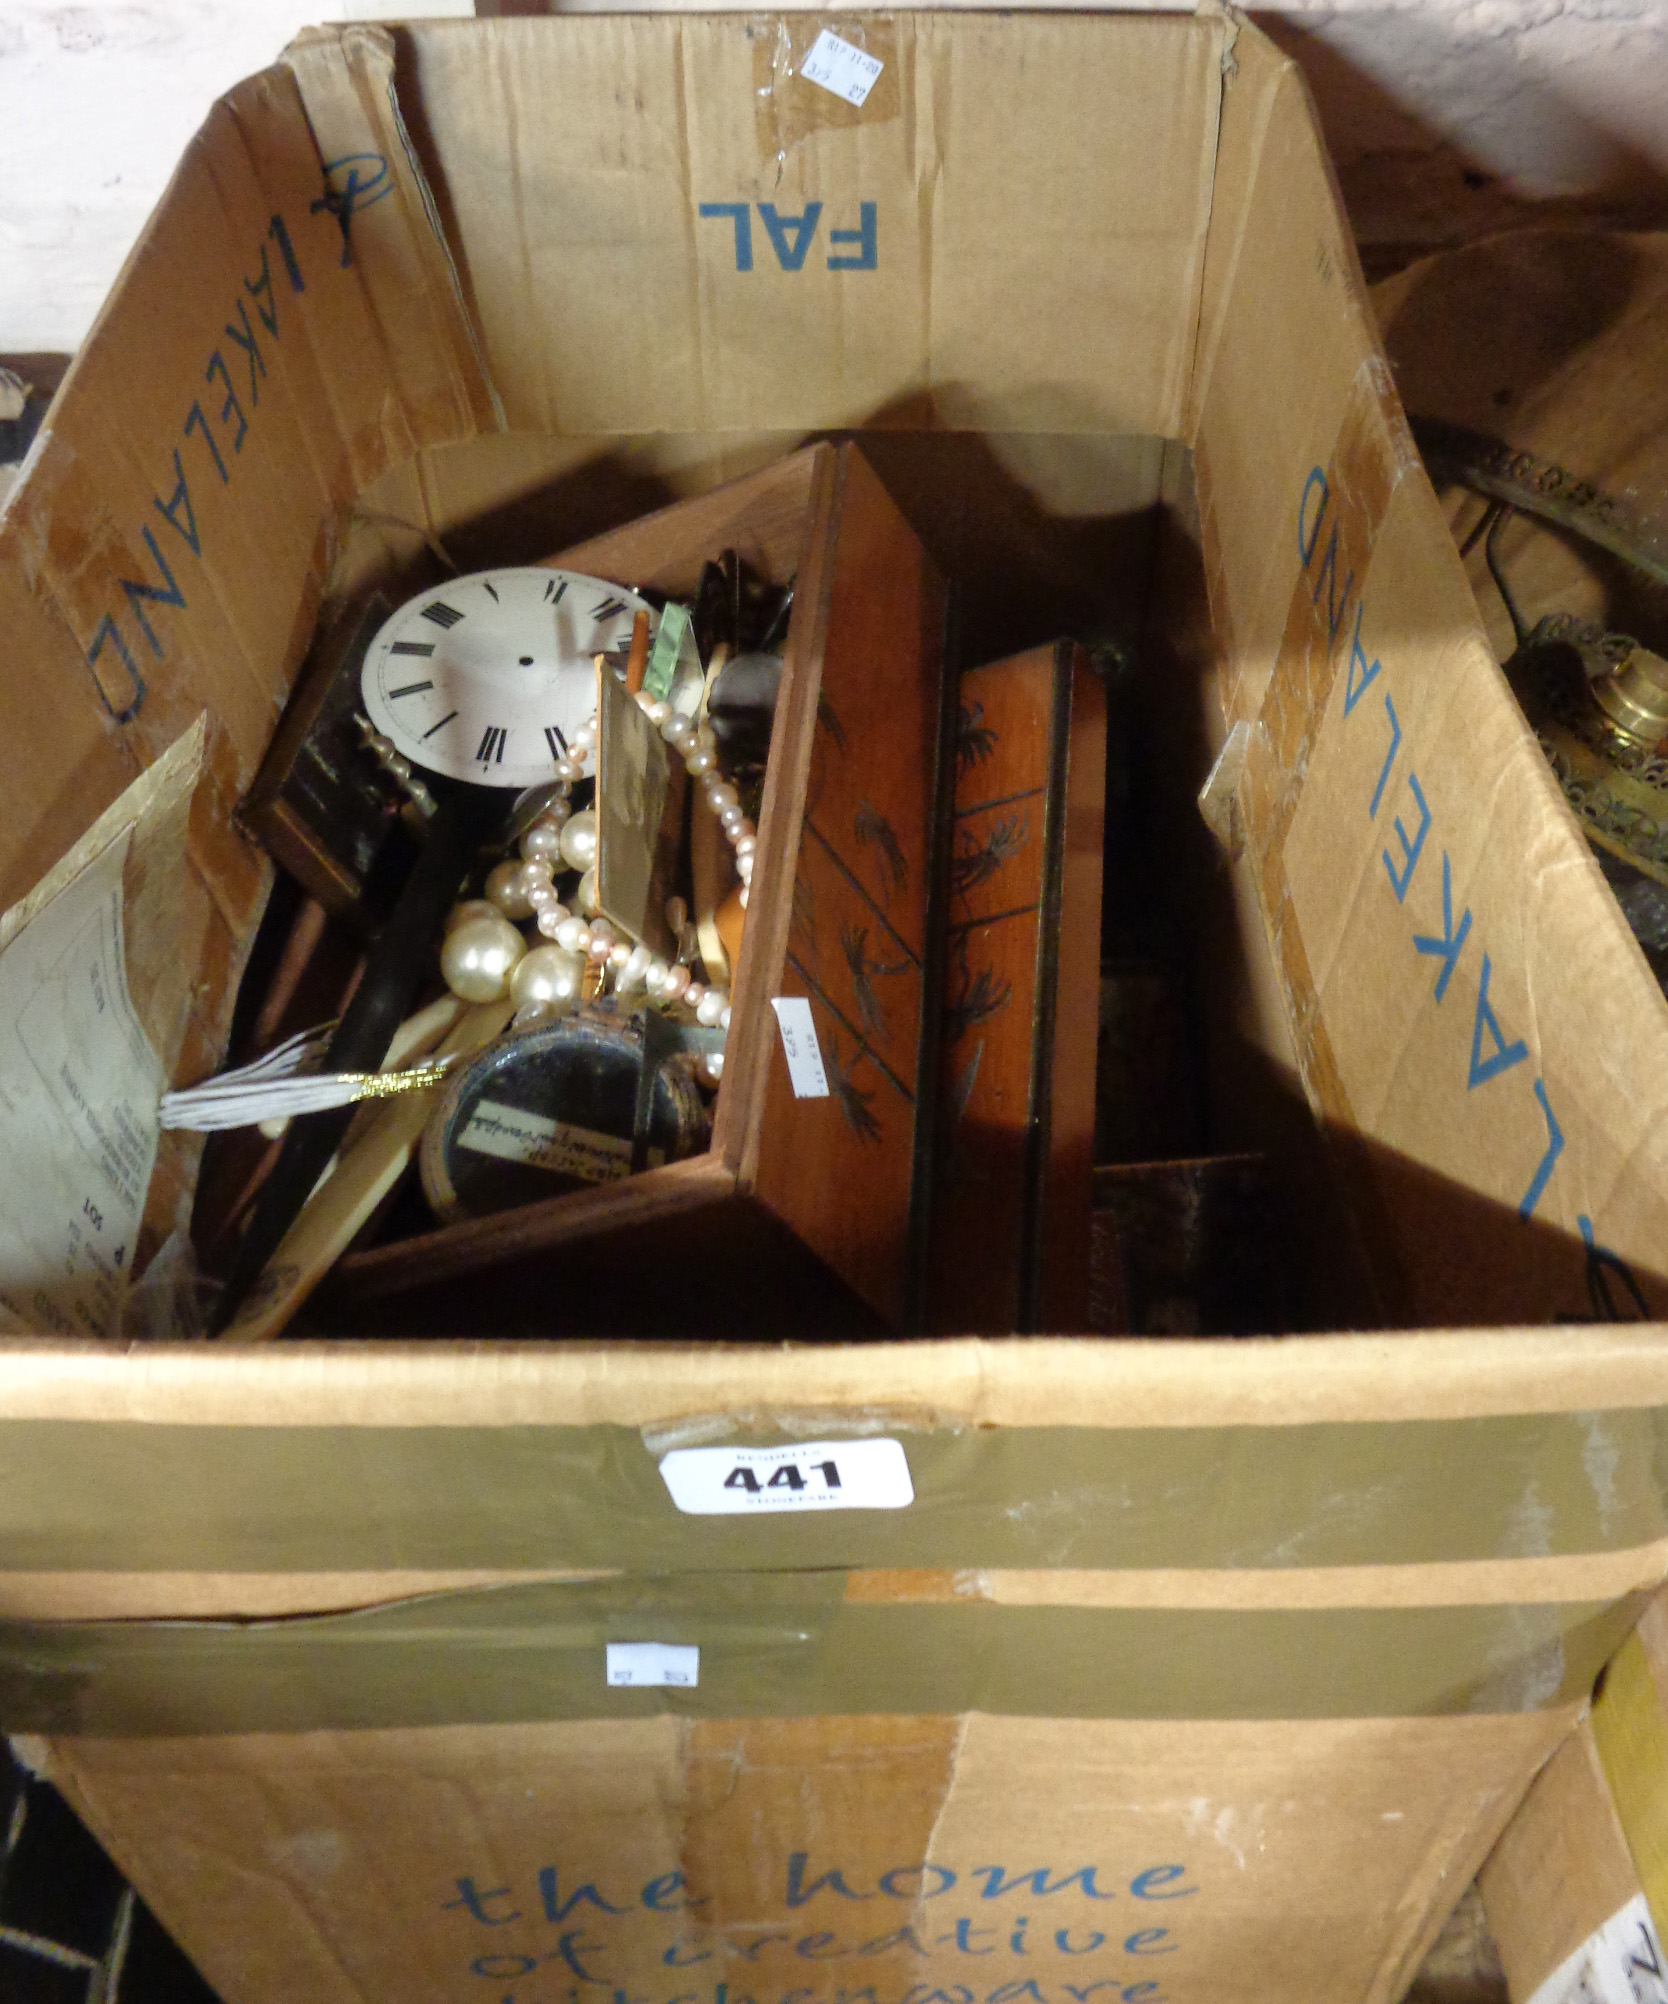 A box containing assorted collectable items including boxes, candlesticks, etc.